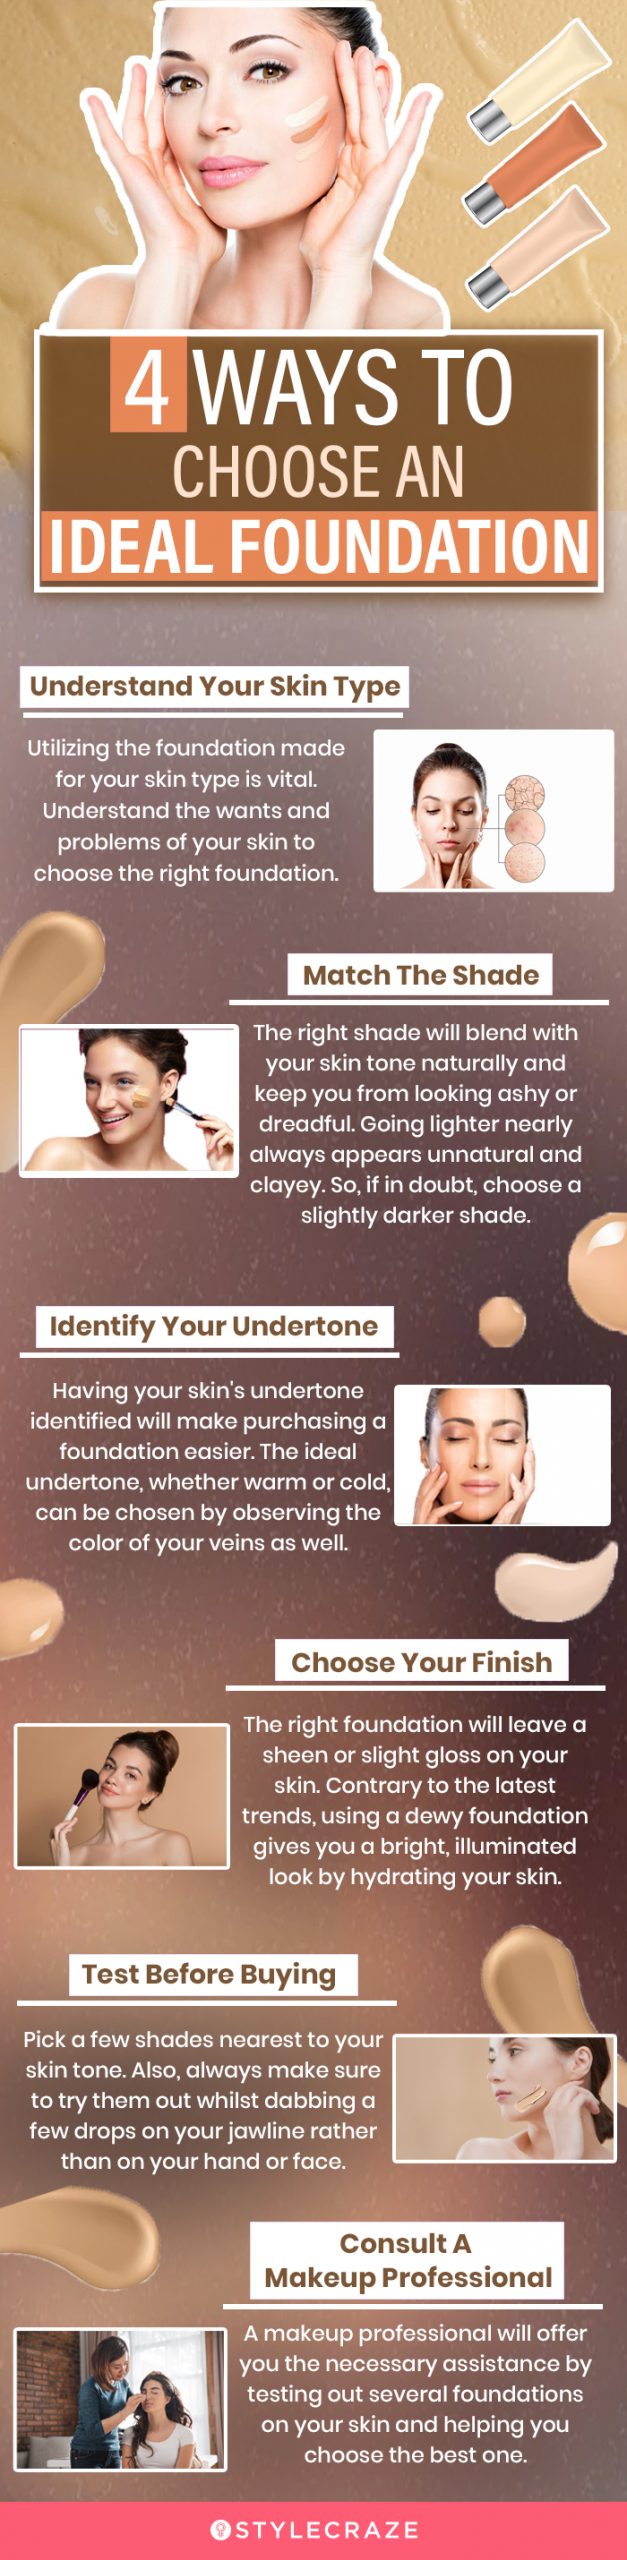 4 ways to choose an ideal foundation (infographic)